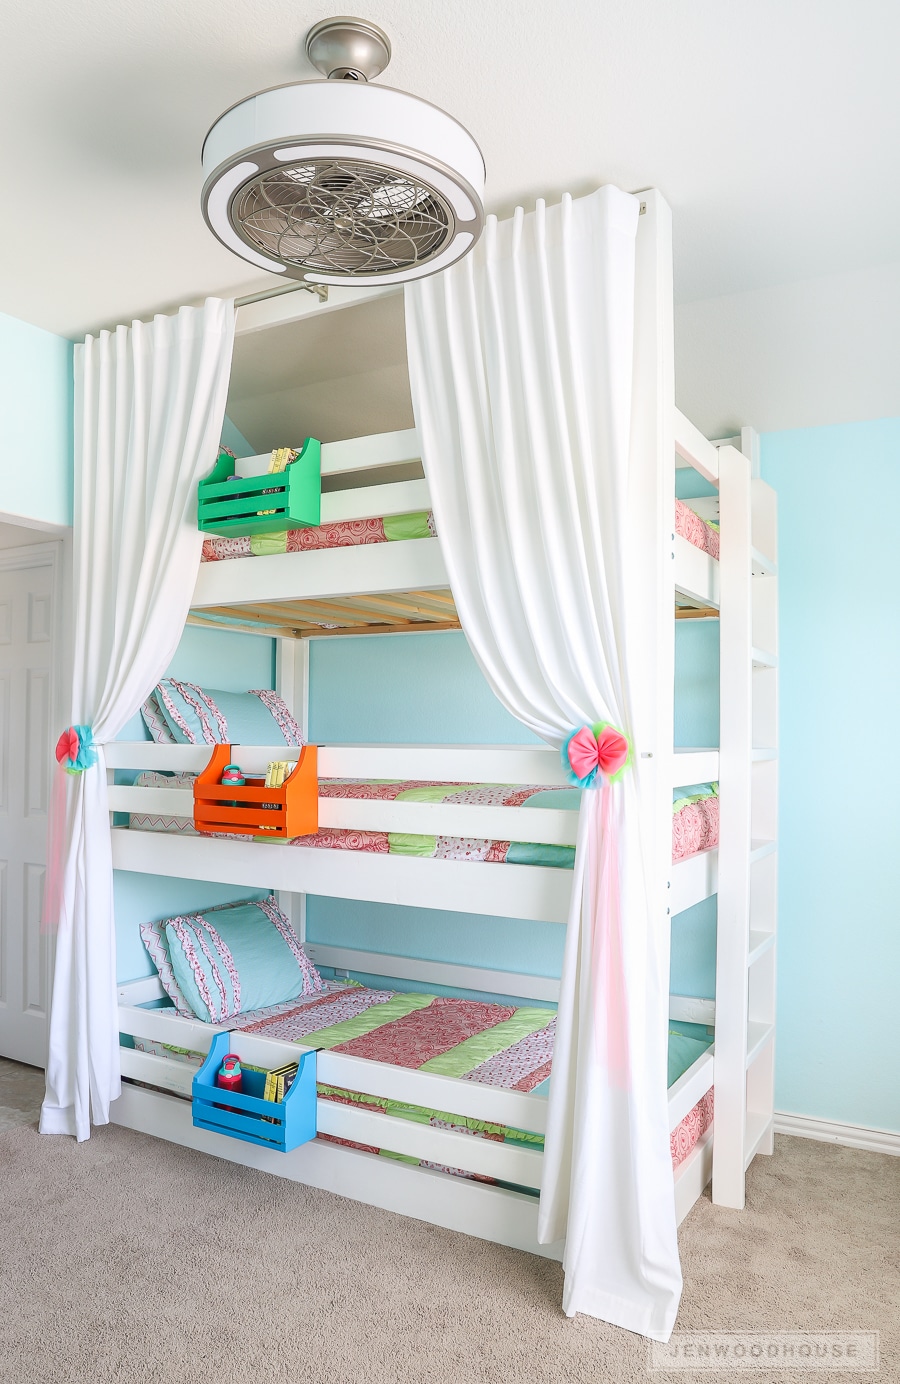 How To Build A Diy Triple Bunk Bed, How To Build Double Size Bunk Beds